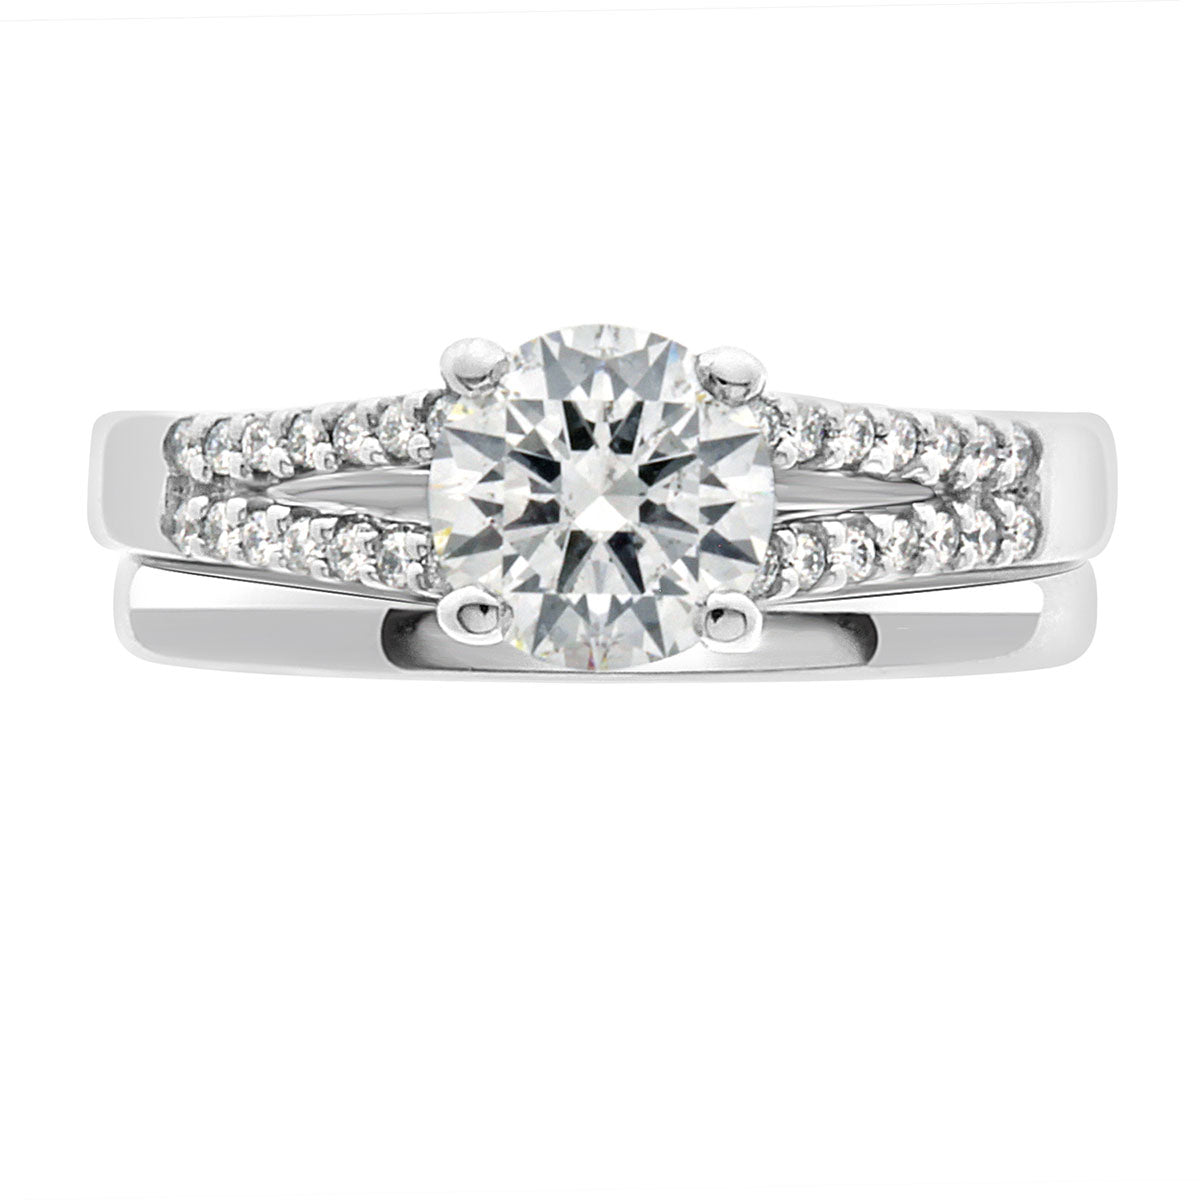 Round Diamond With Split Band made from platinum with a plain wedding ring